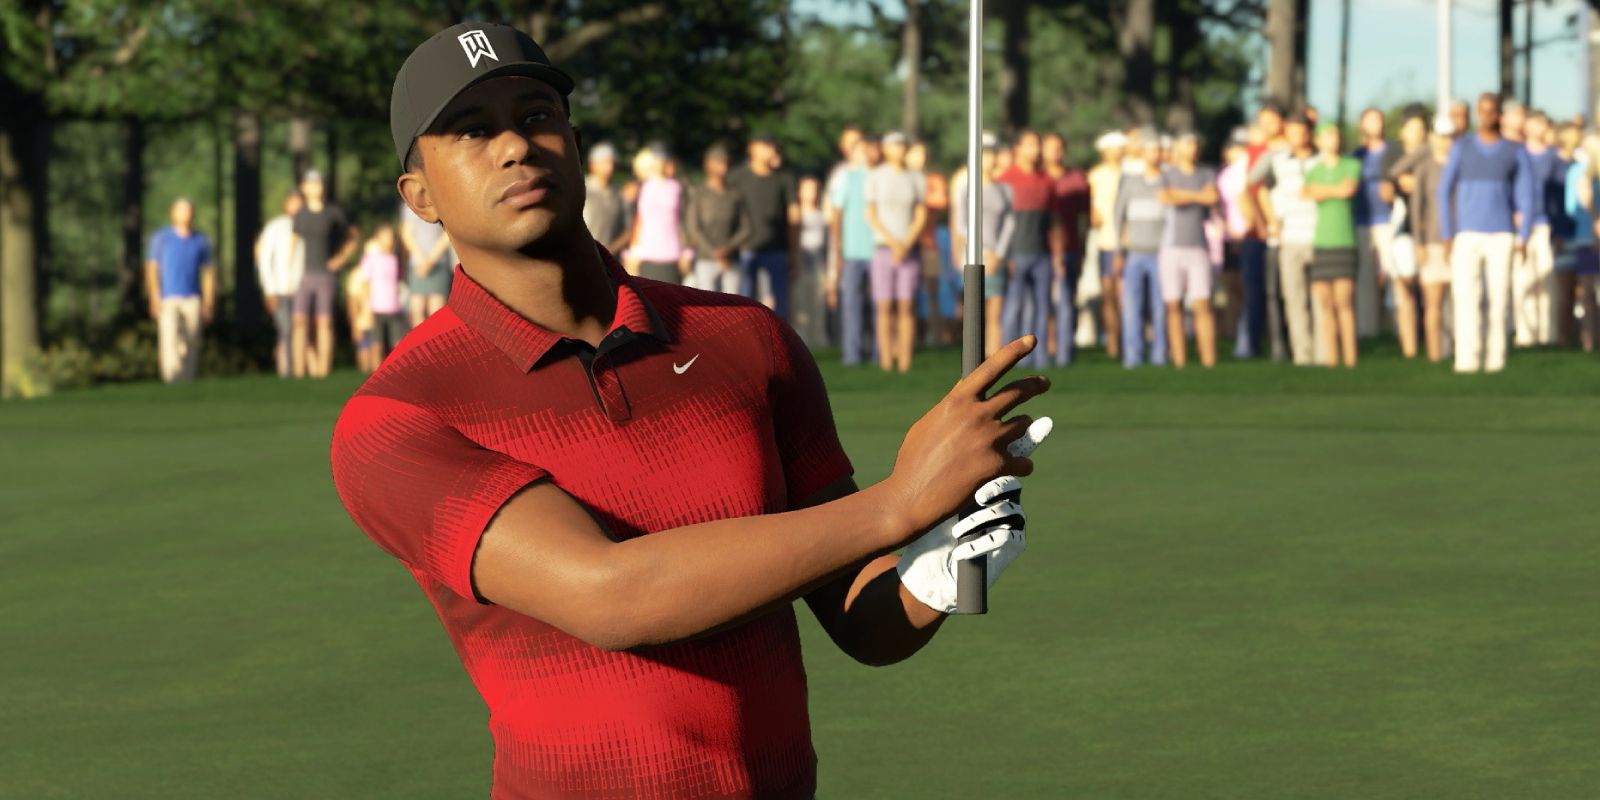 In PGA Tour 2K23, a golfer stands ready with his club.